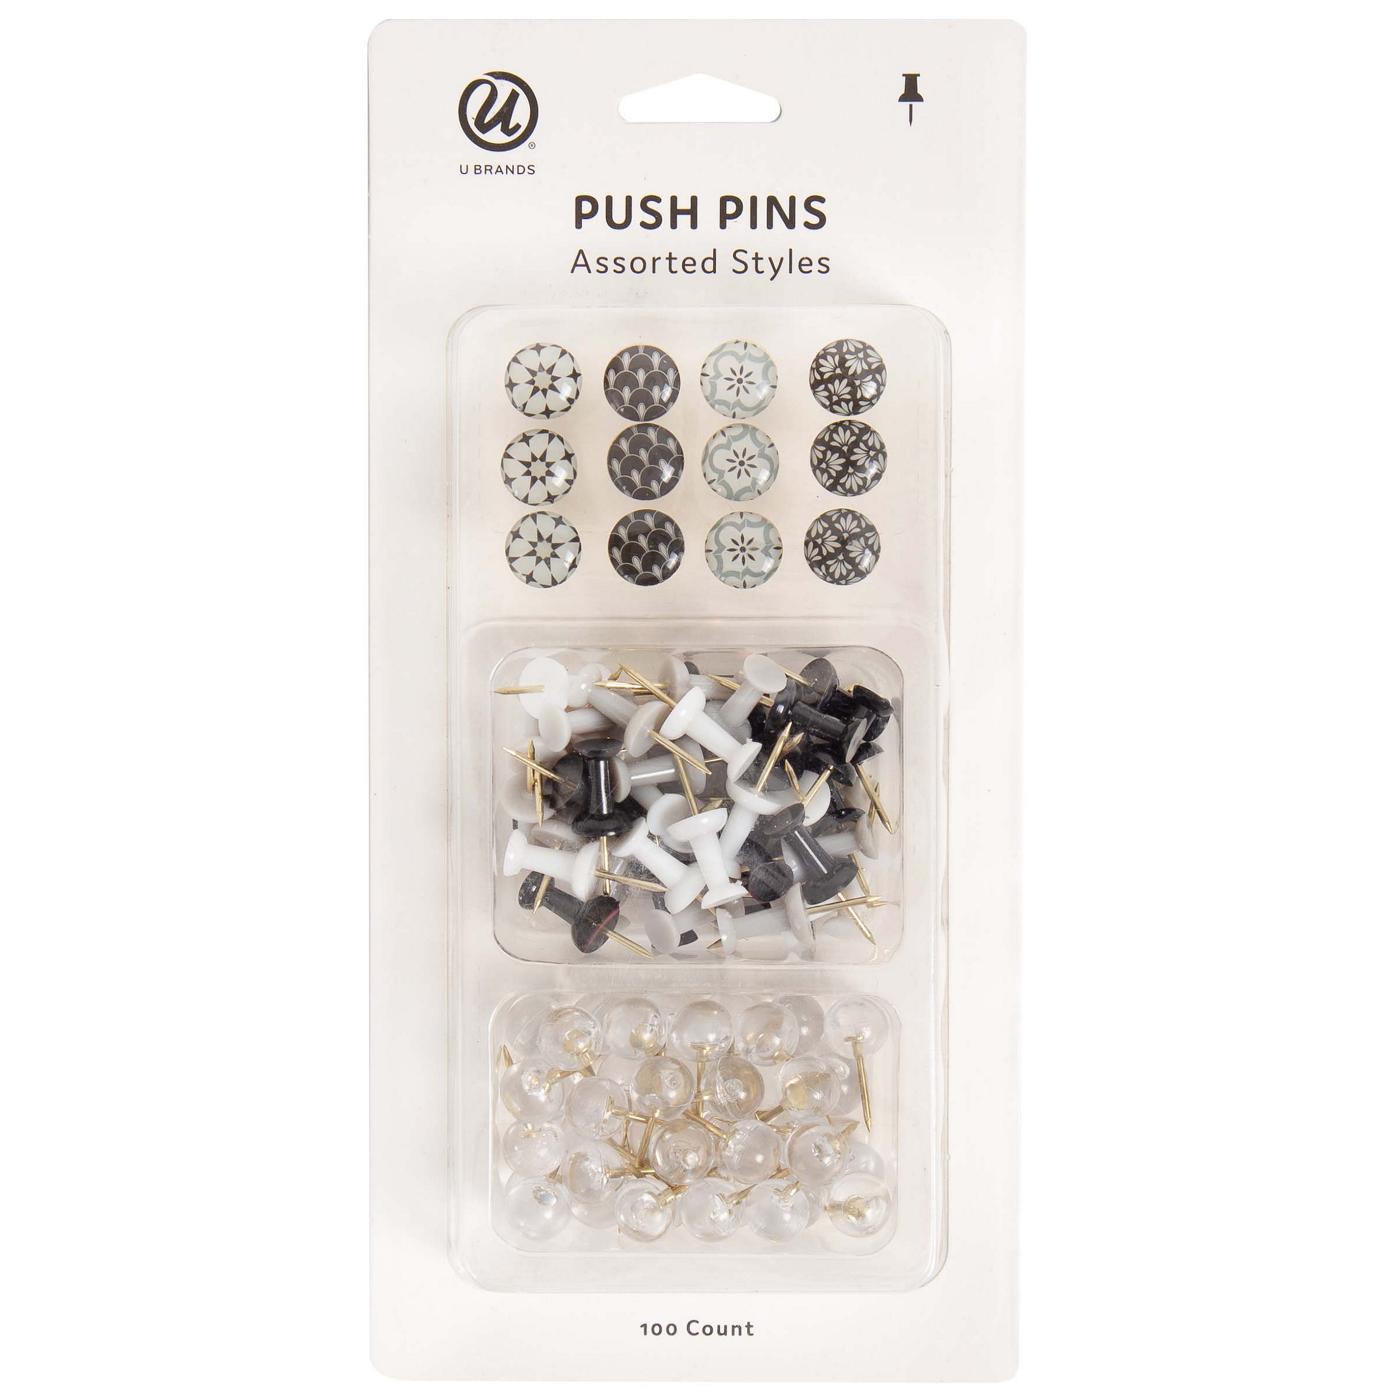 U Brands Moroccan Assorted Styles Push Pins; image 1 of 2